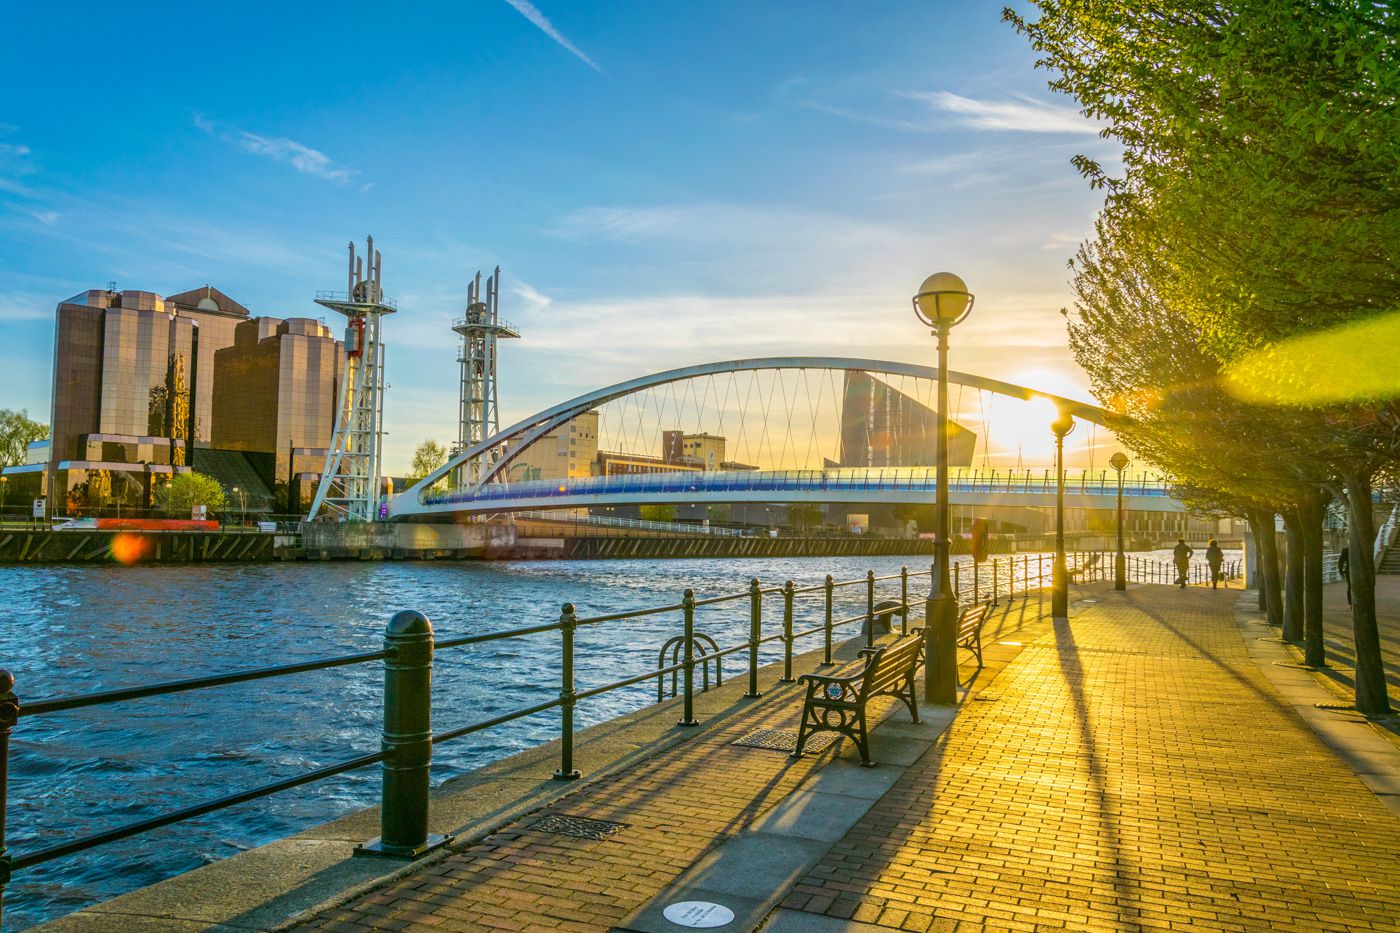 Should I spend 3, 4, or 5 days in Manchester? | Budget Your Trip